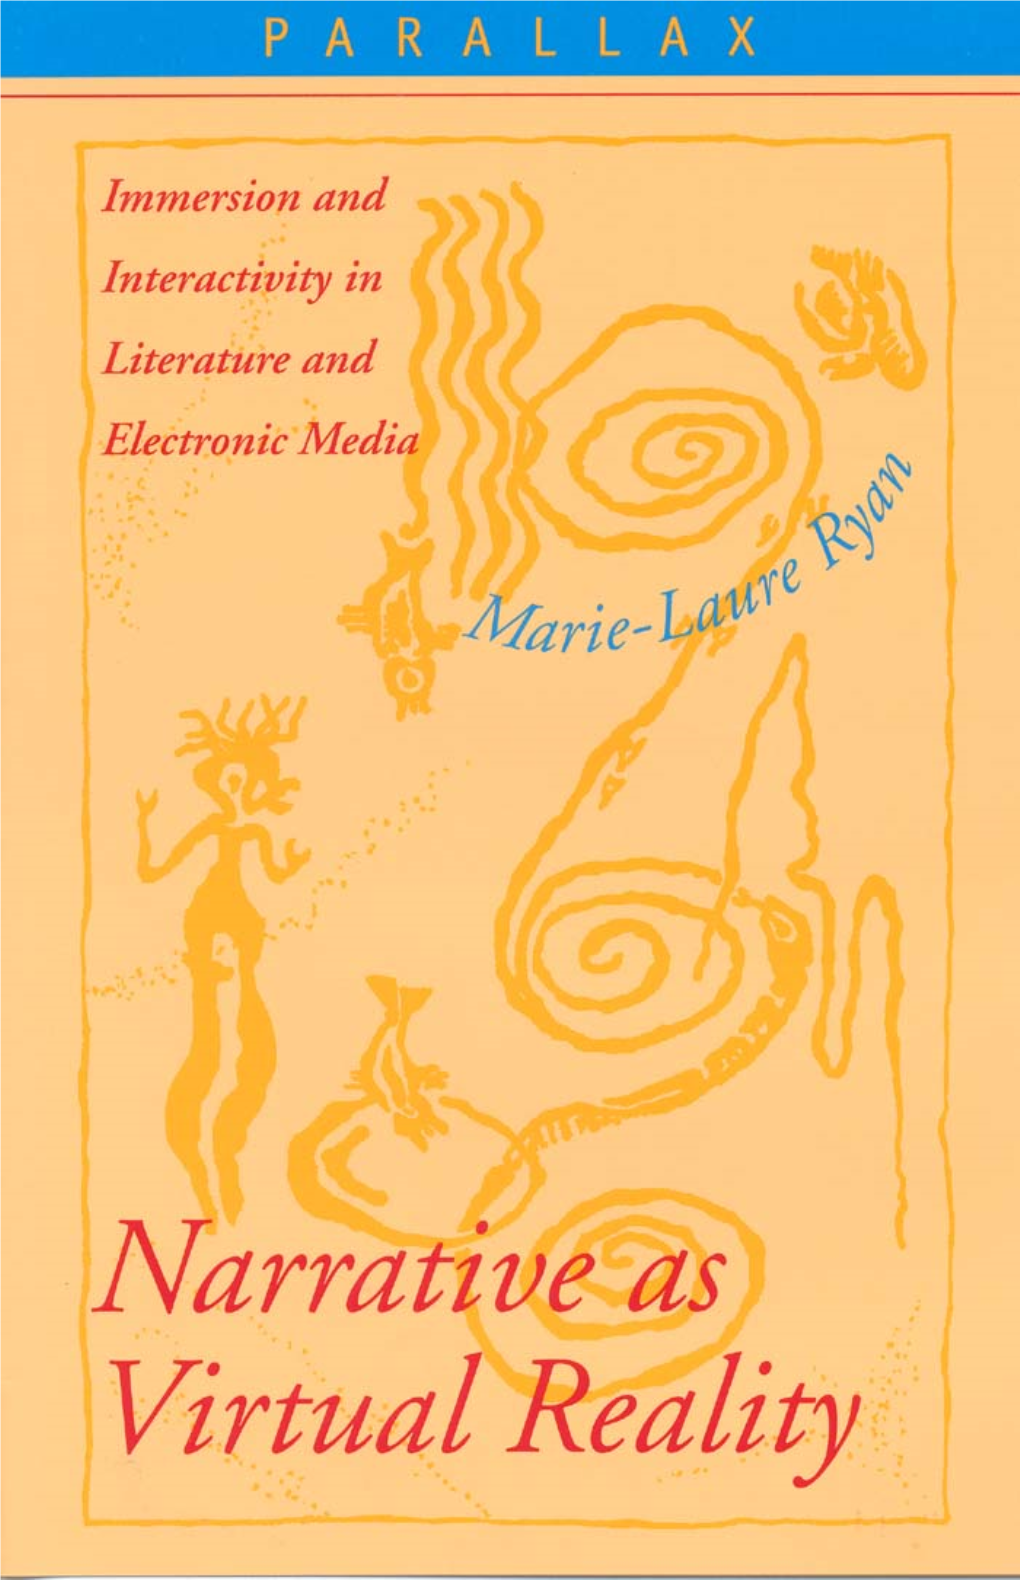 Narrative As Virtual Reality : Immersion and Interactivity in Literature and Electronic Media / Marie-Laure Ryan